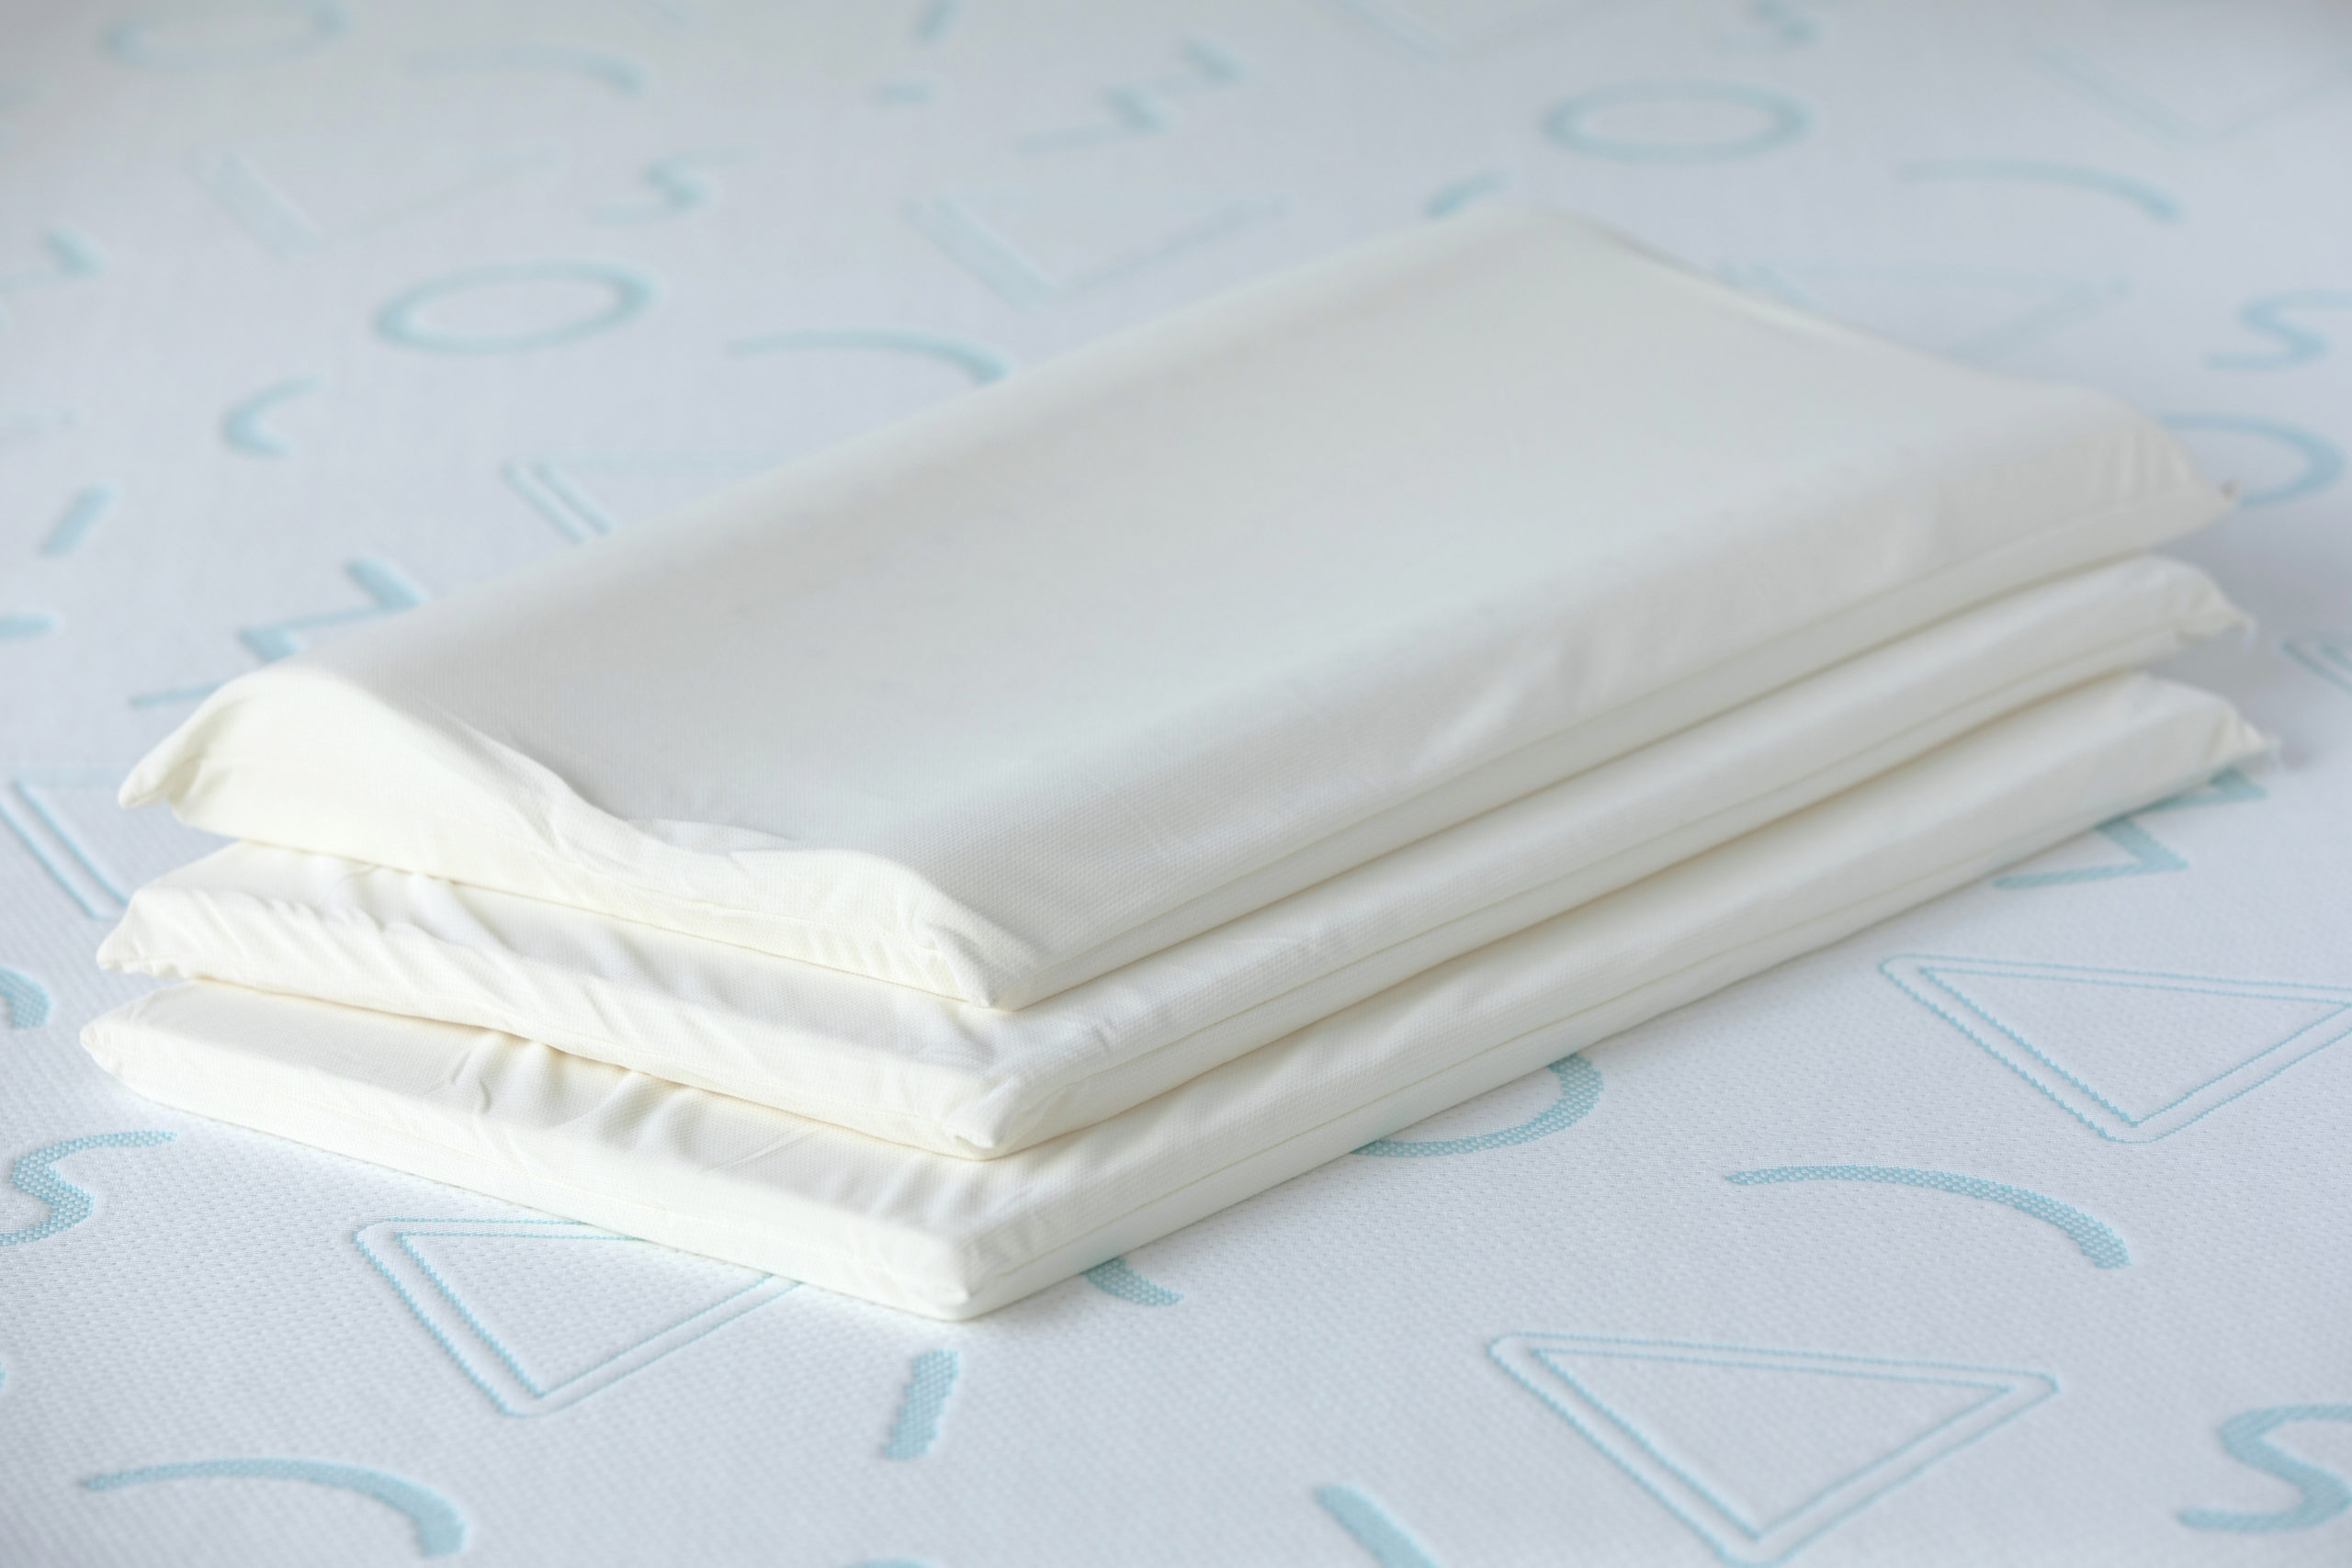 The Jama pillow’s three memory foam layers in off white covers sit on Jama mattress to show the inside contents of the pillow.